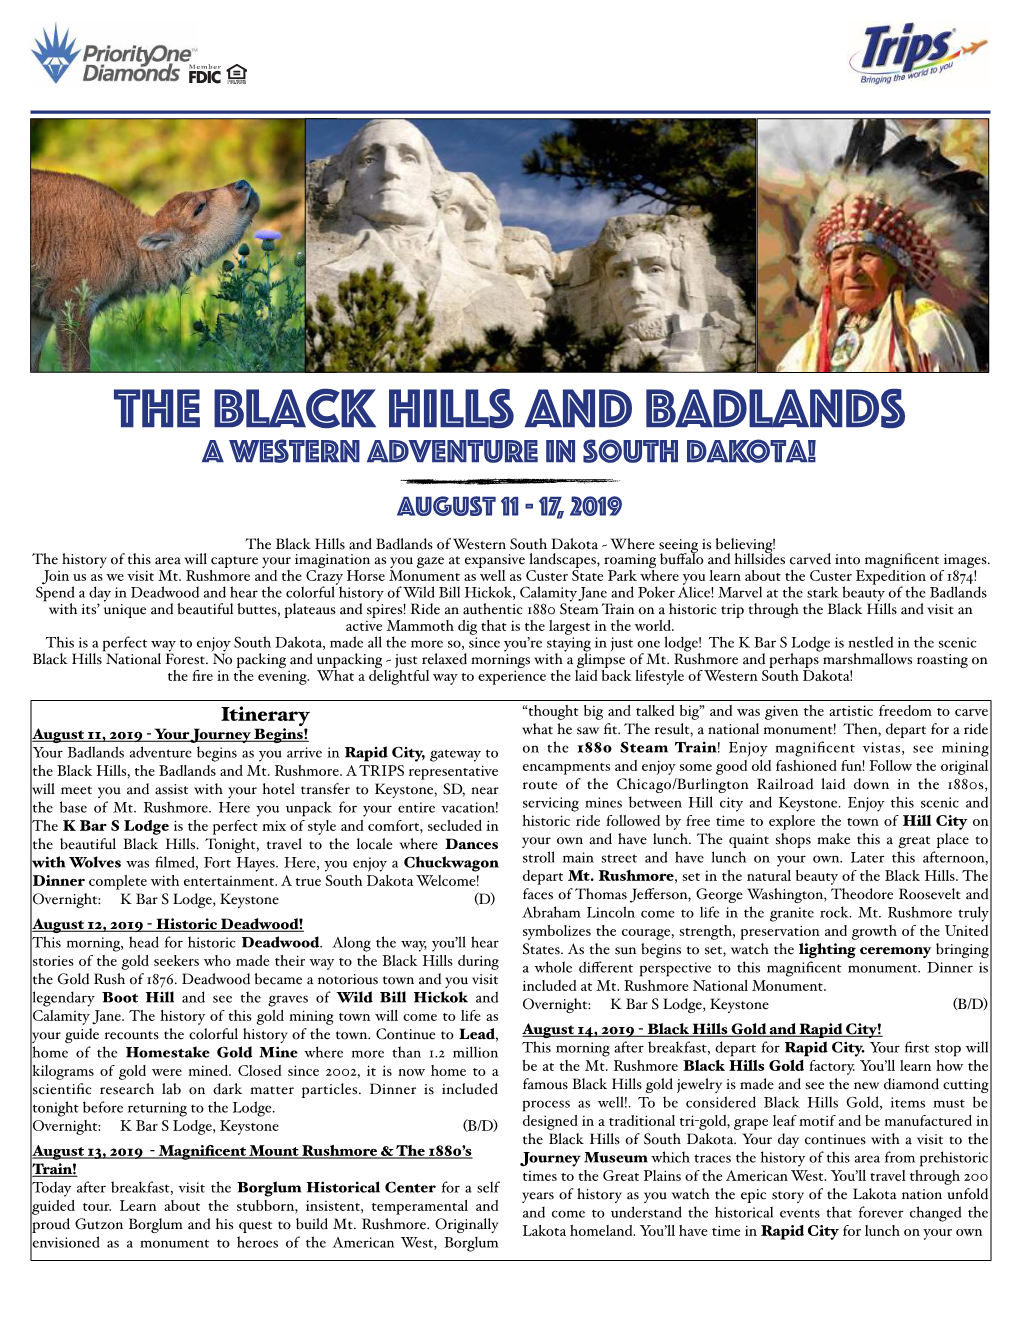 The Black Hills and Badlands a Western Adventure in South Dakota! August 11 - 17, 2019